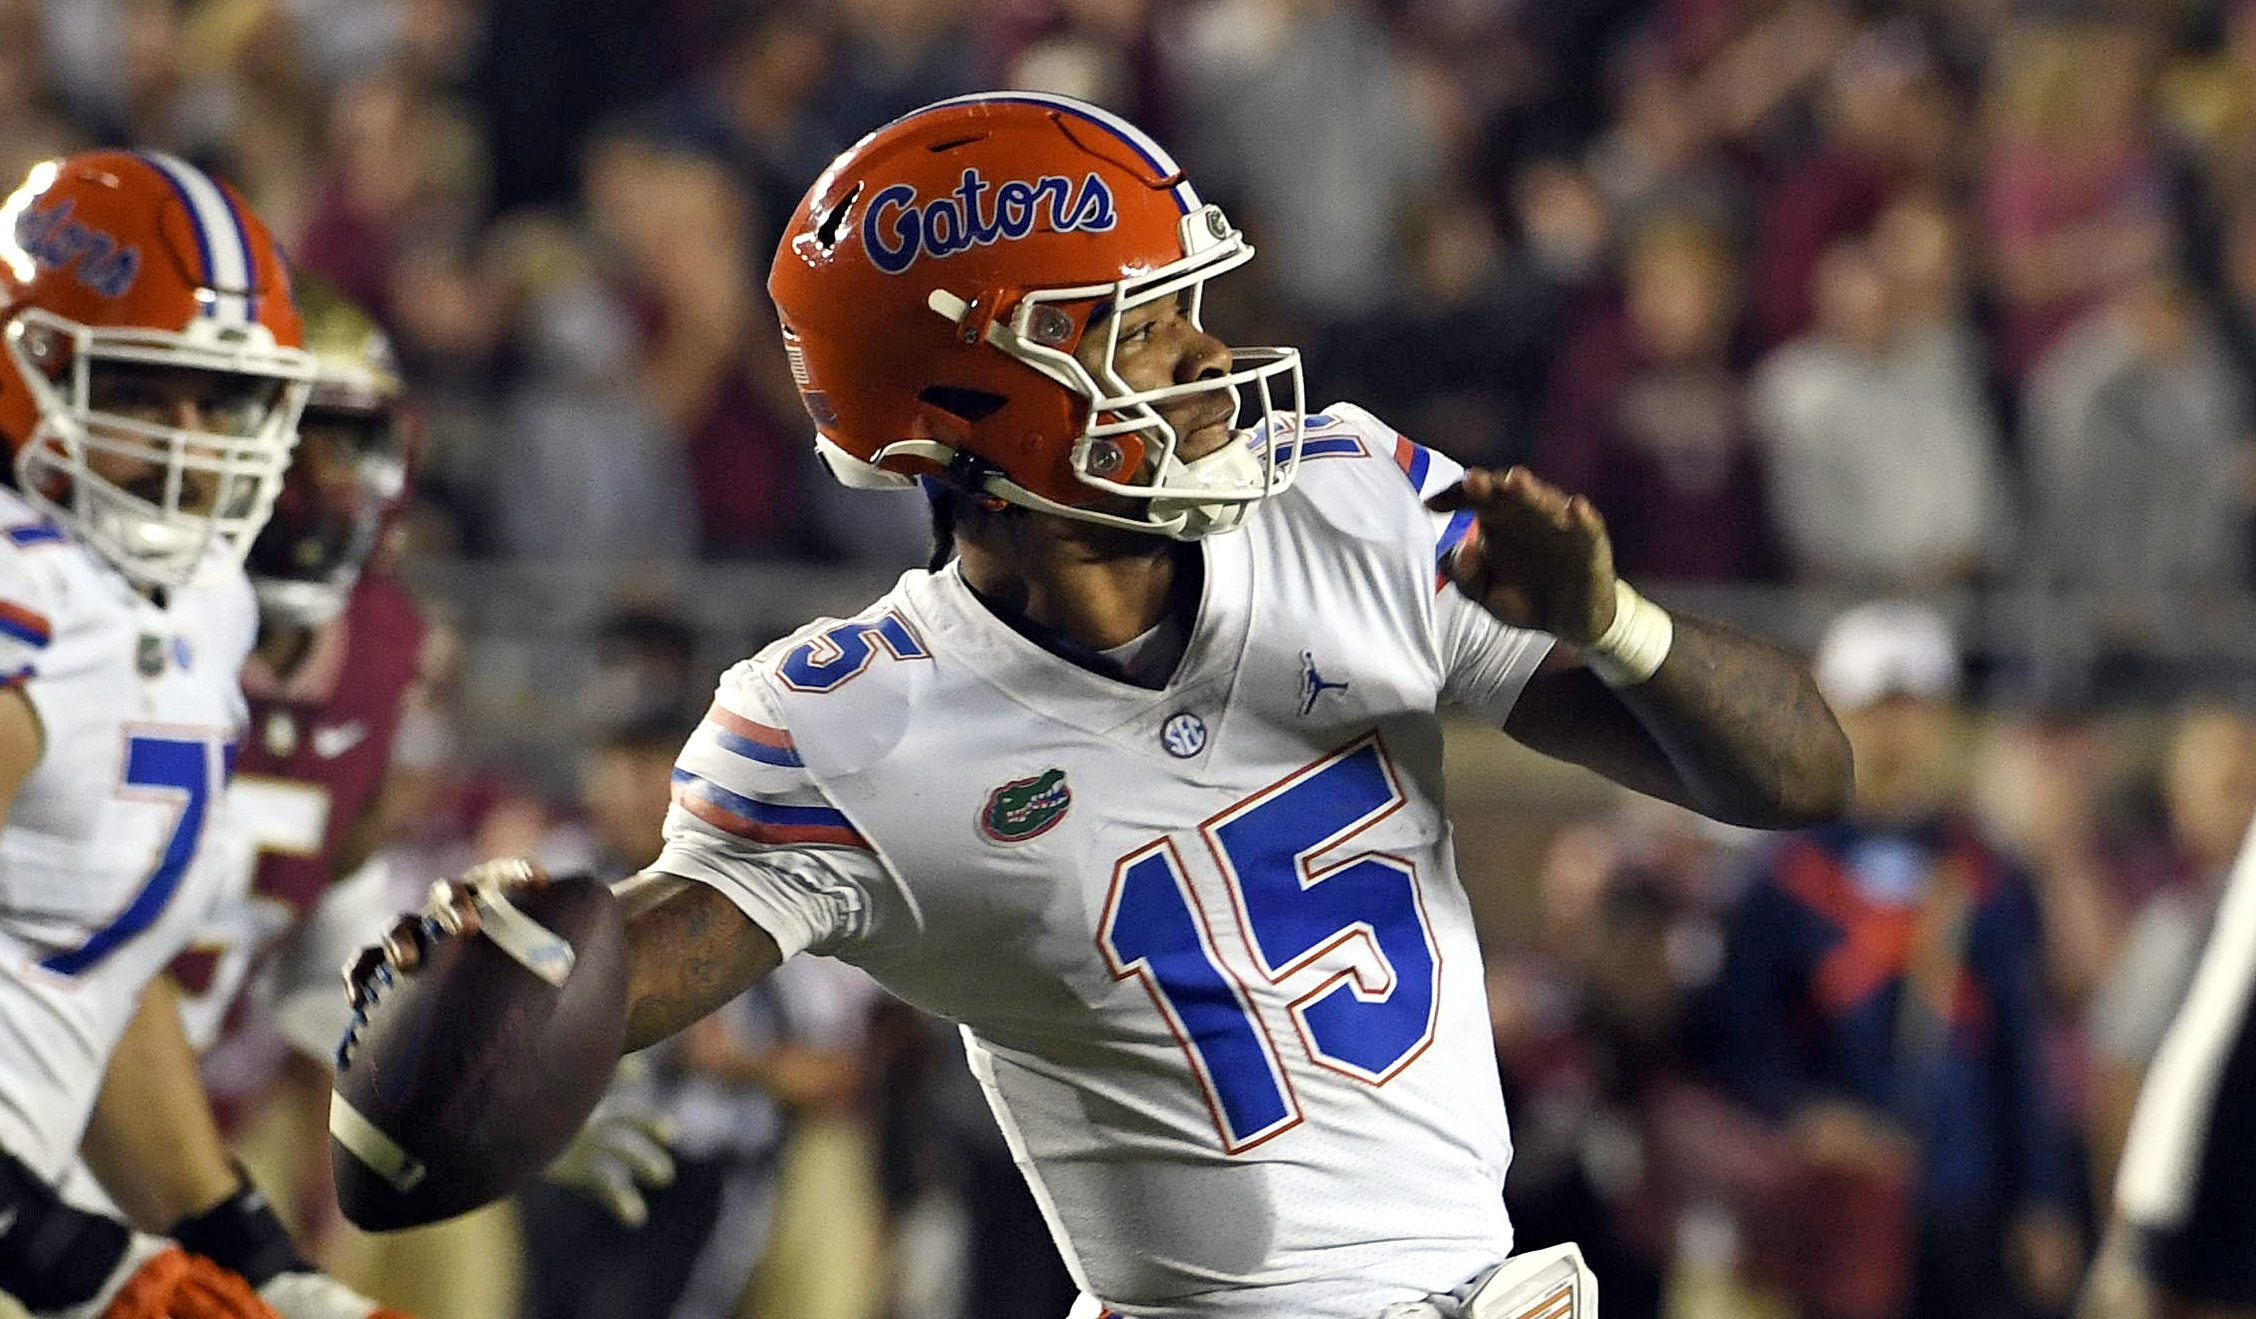 Florida Gators quarterback Anthony Richardson throws a pass. He's expected to be selected in the first round of the 2023 NFL Draft.